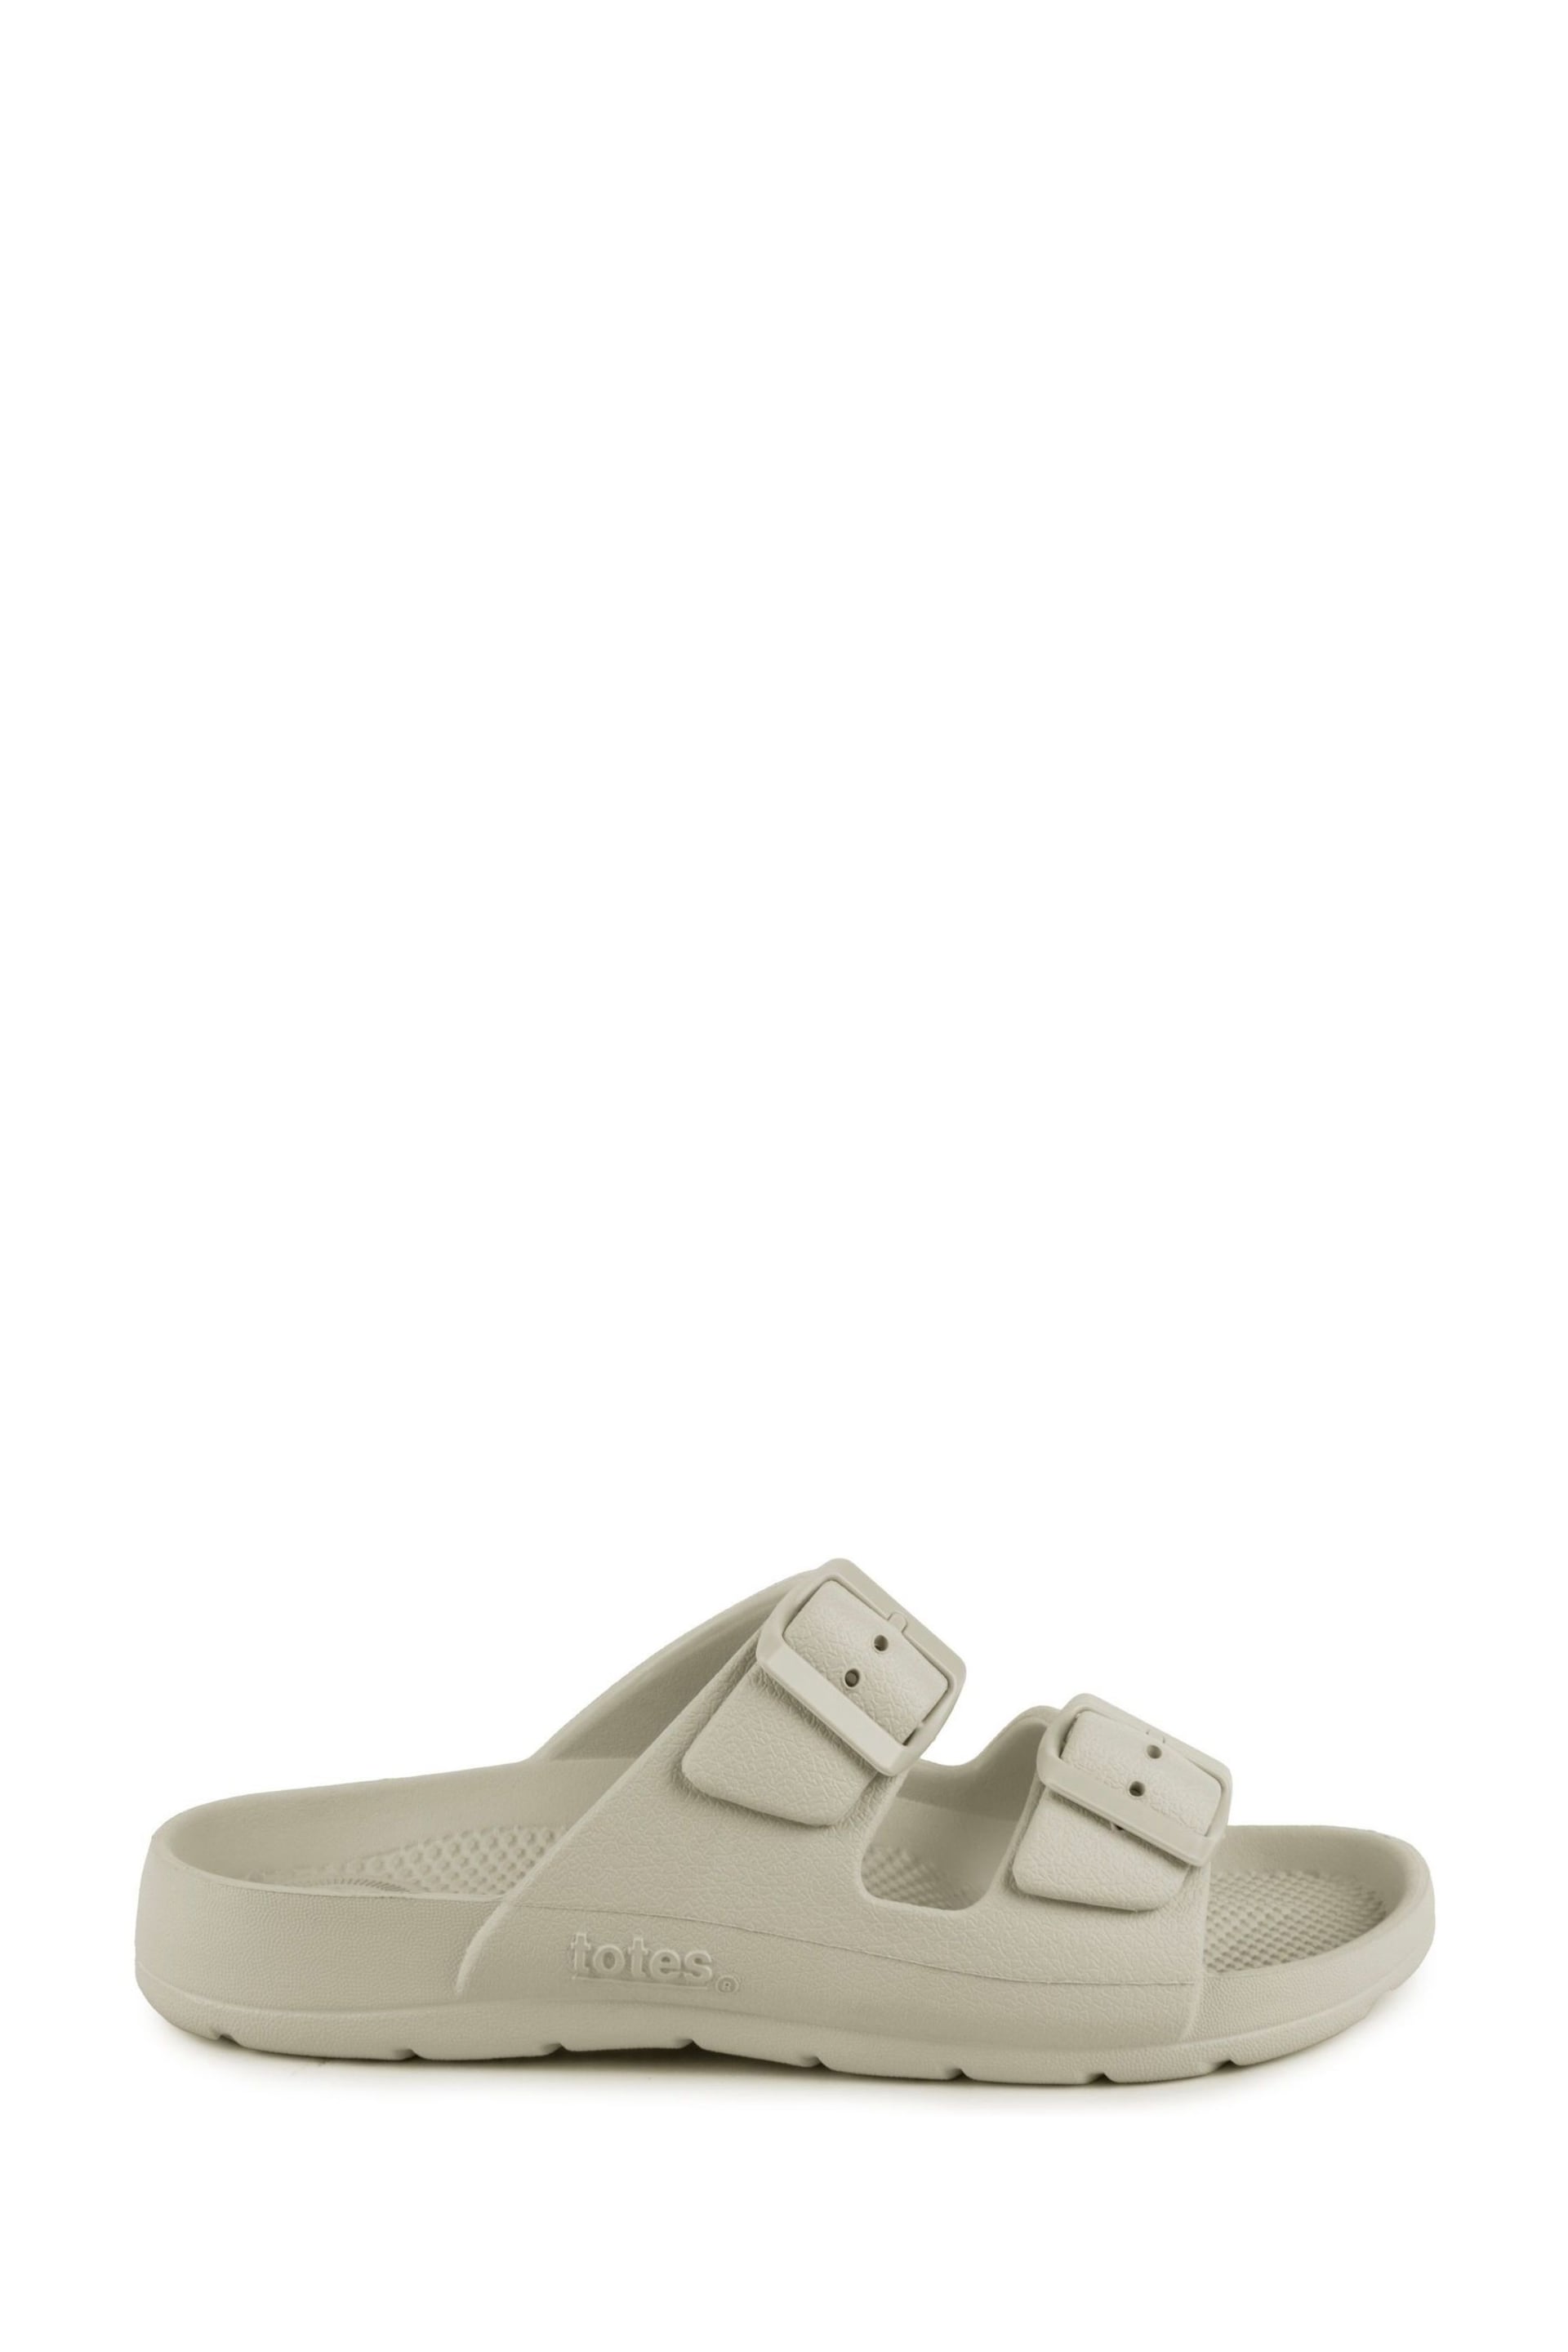 Totes Nude Solbounce Ladies Adjustable Double Buckle Slides - Image 2 of 5